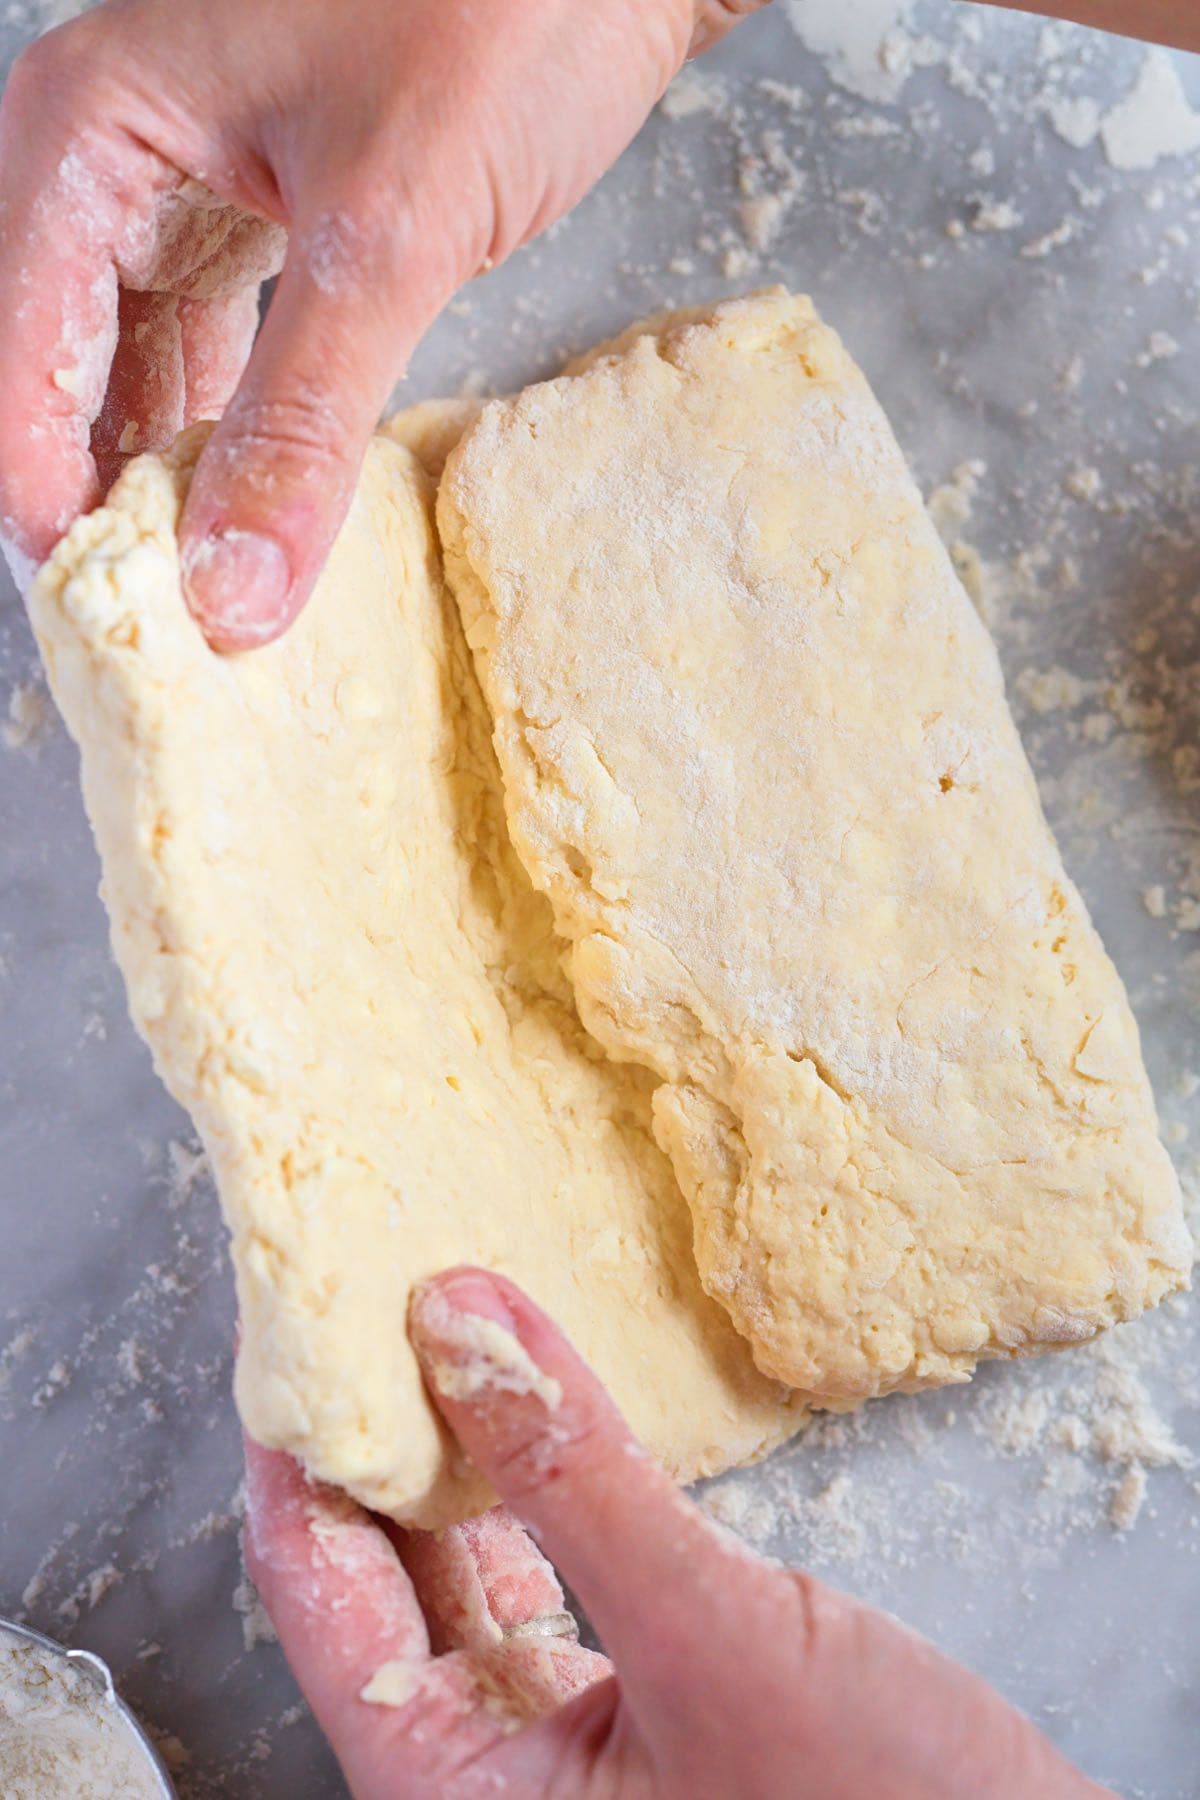 Folding the biscuits dough